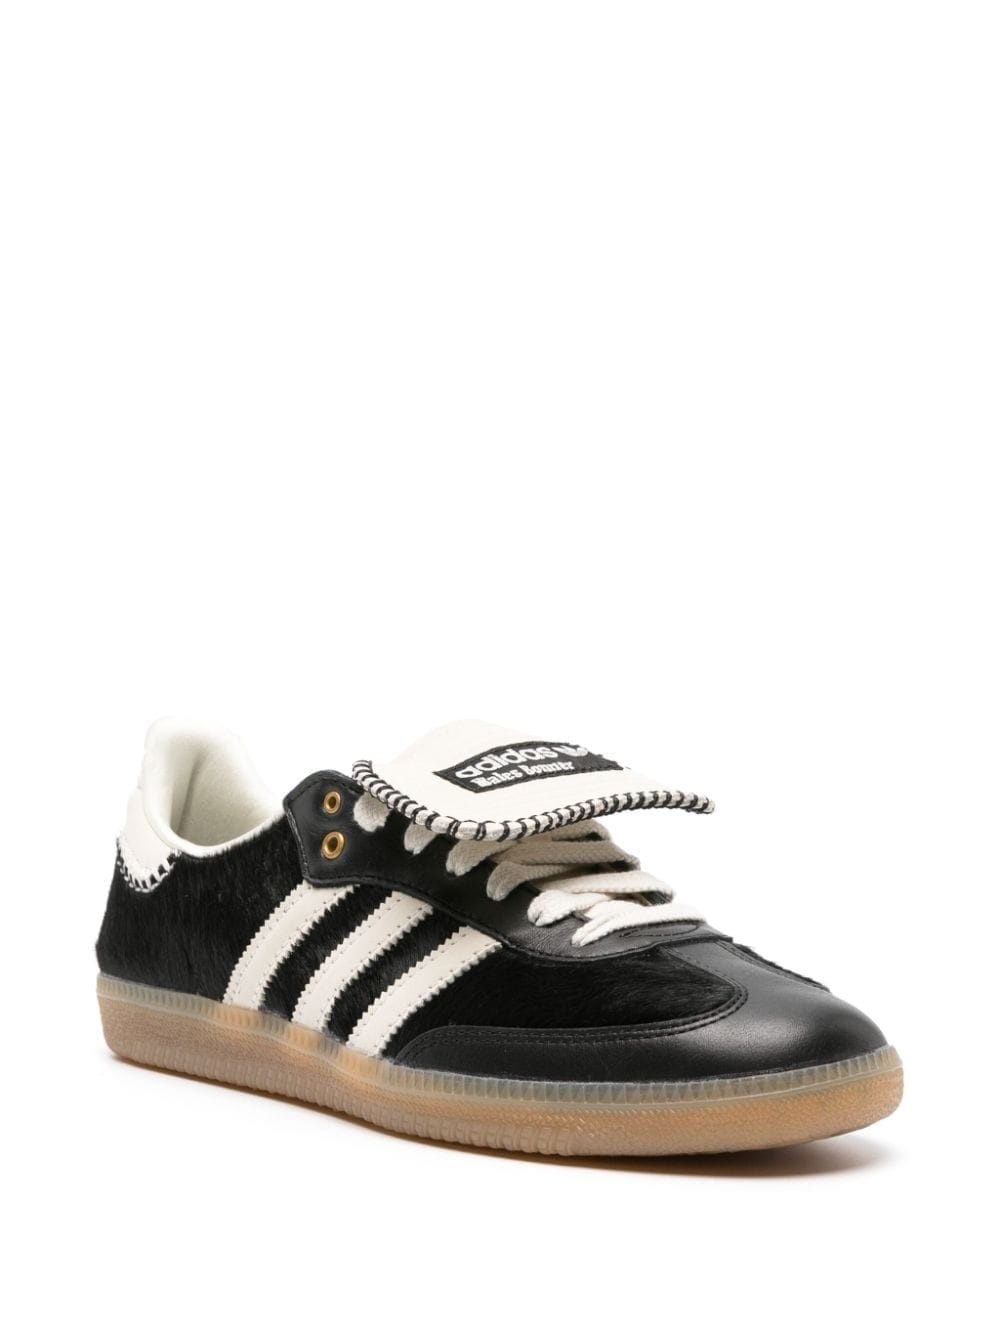 x Wales Bonner leather sneakers - 2